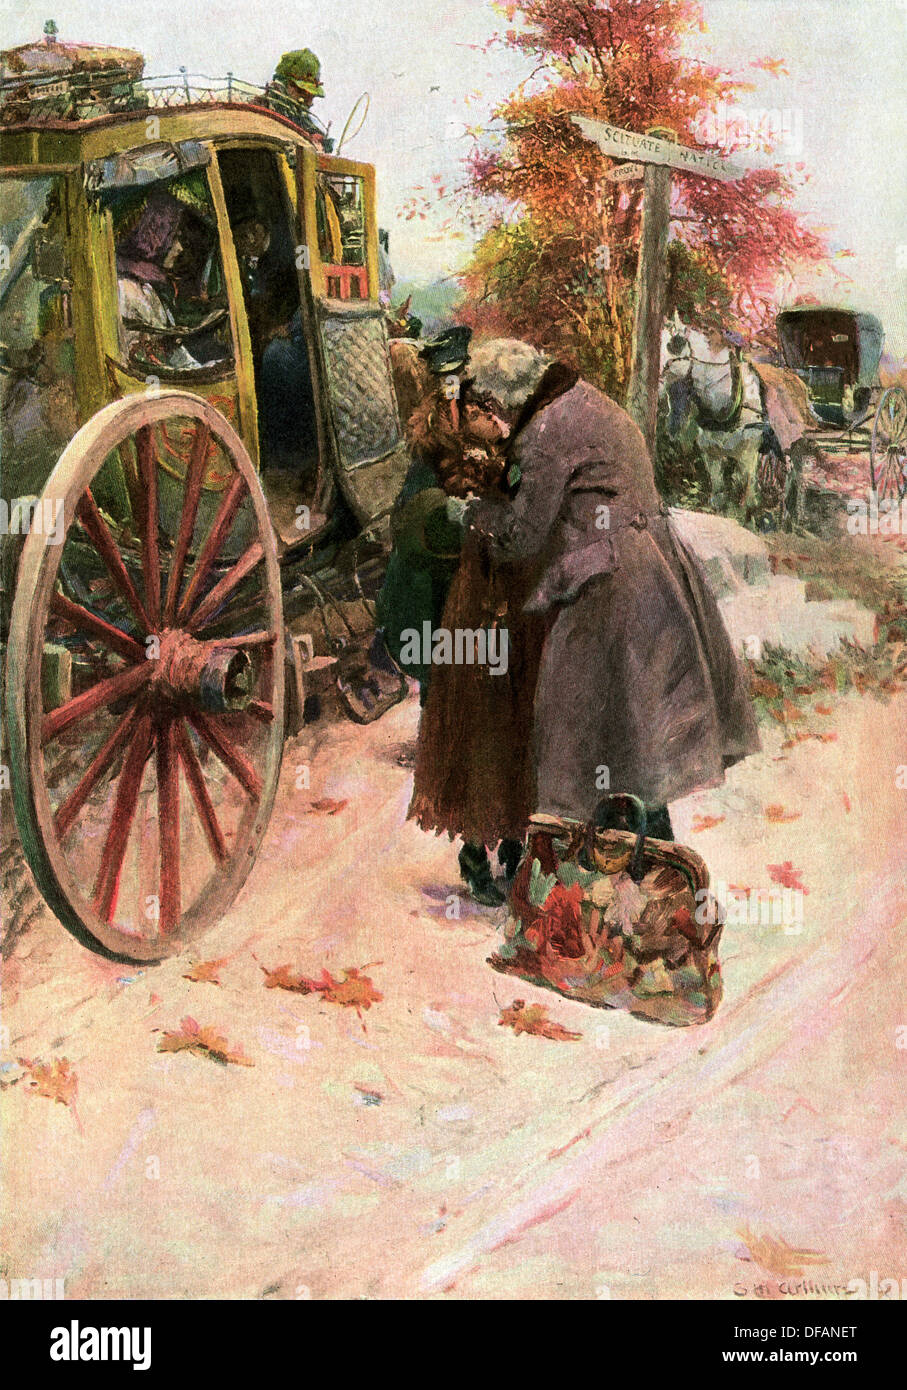 Stagecoach on the Boston Post Road picking up a wayside passenger. Color halftone of an illustration by Stanley Arthurs Stock Photo